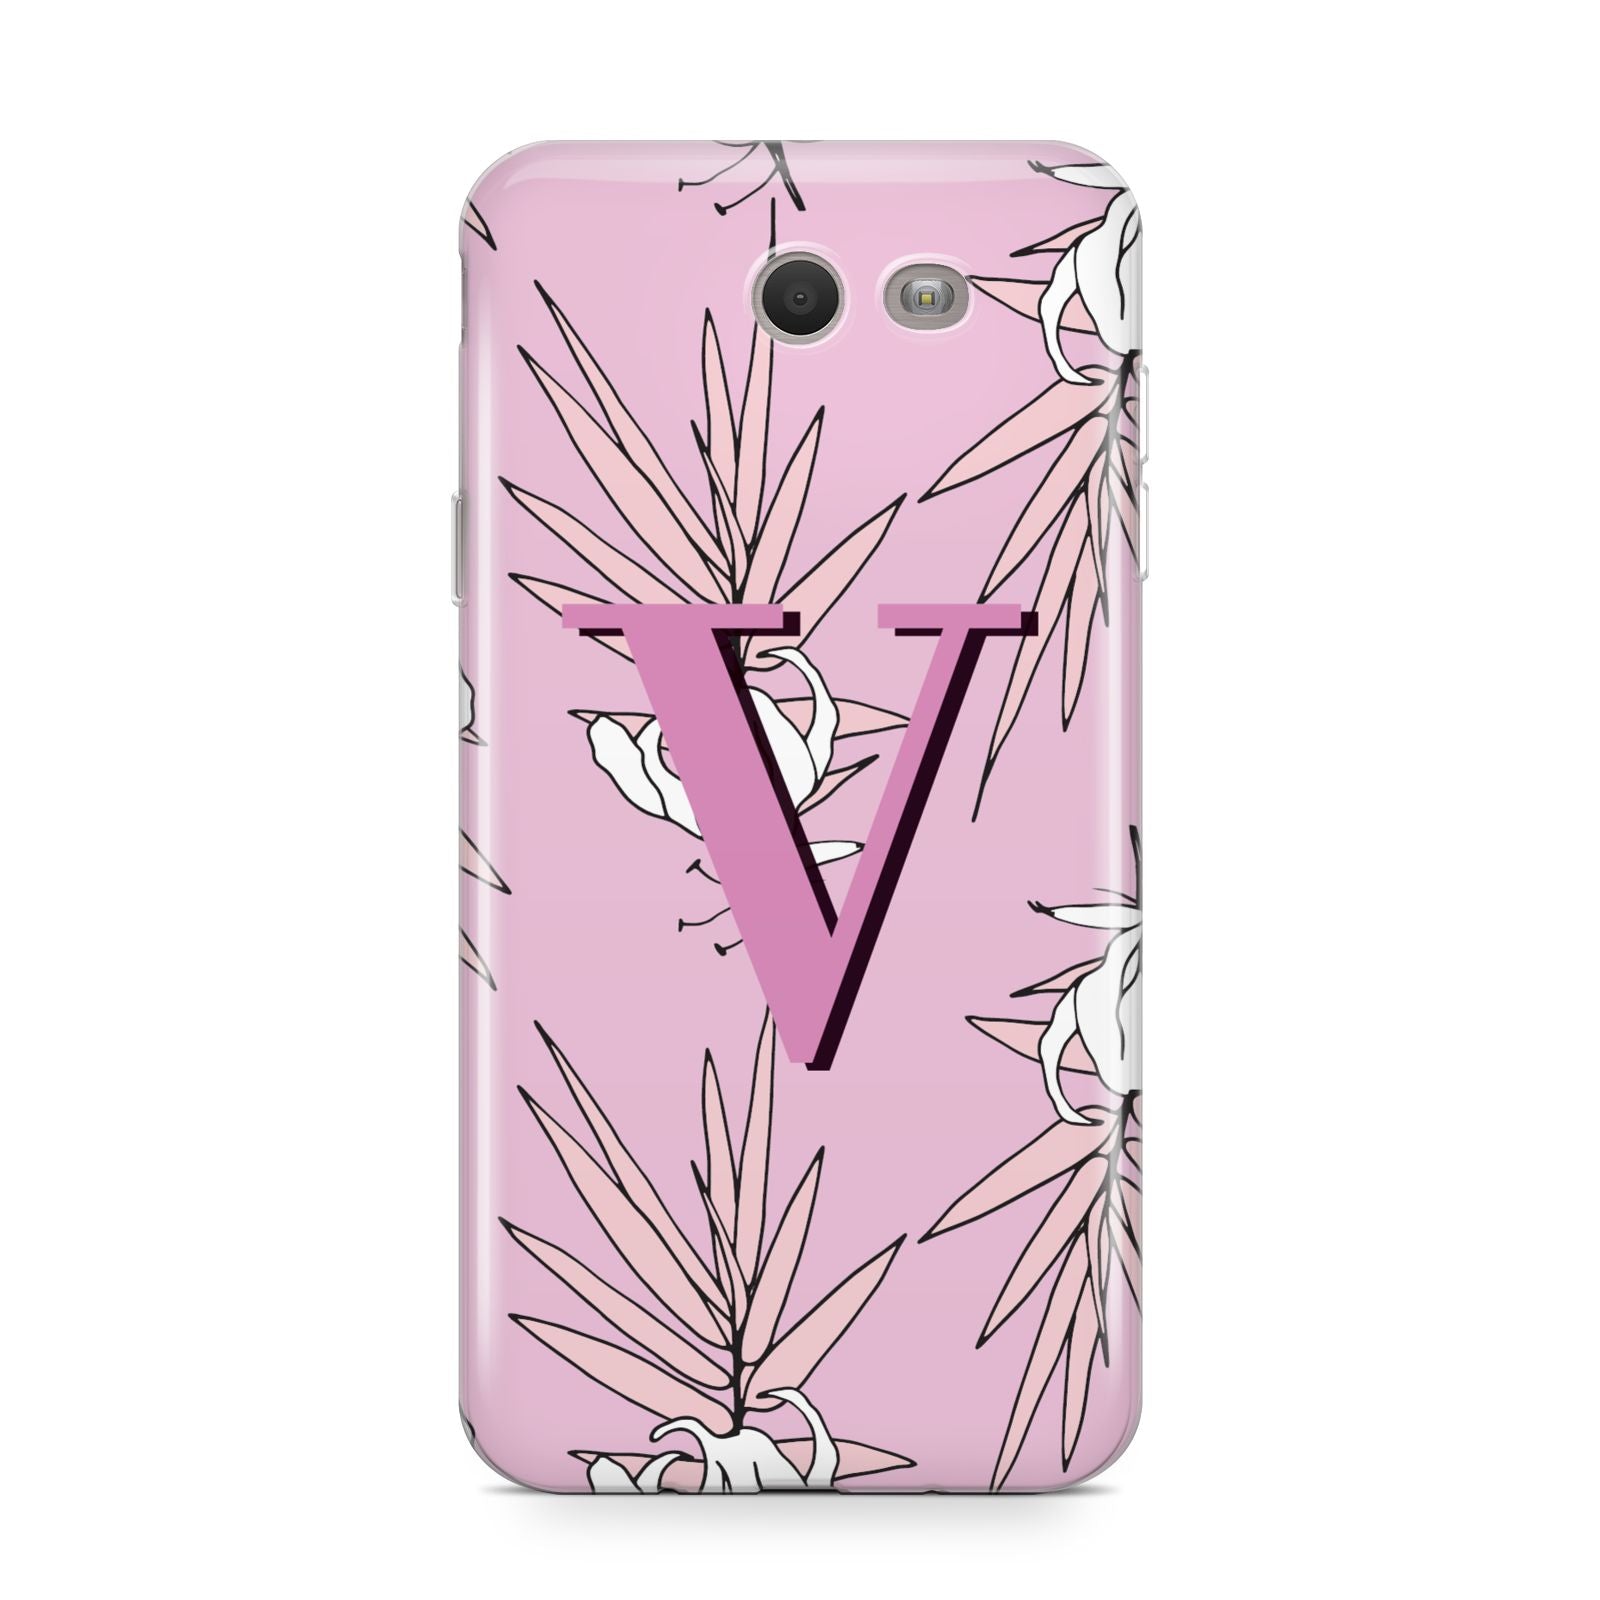 Personalised Pink and White Floral Monogram Samsung Galaxy J7 2017 Case